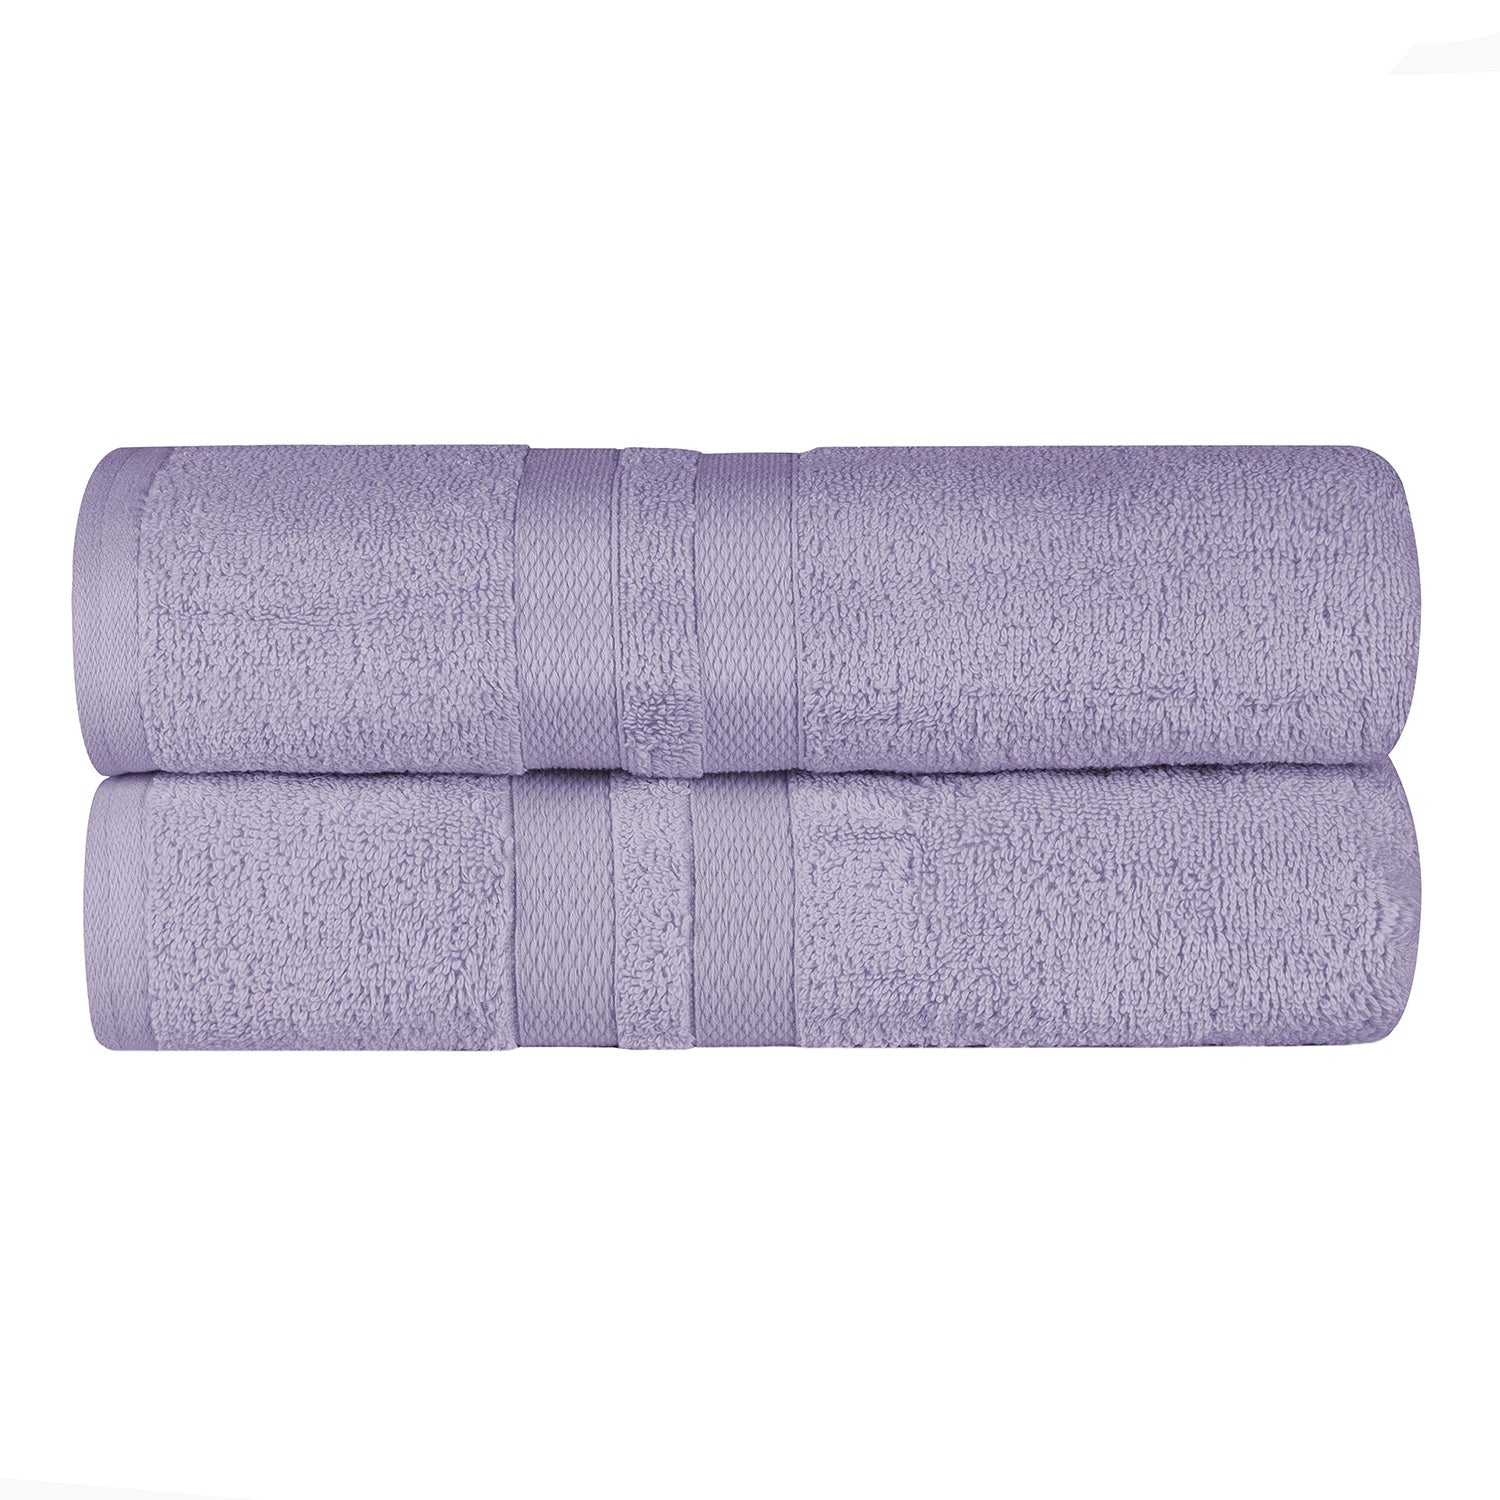 Superior Ultra Soft Cotton Absorbent Solid Bath Sheet (Set of 2) -  Wisteria